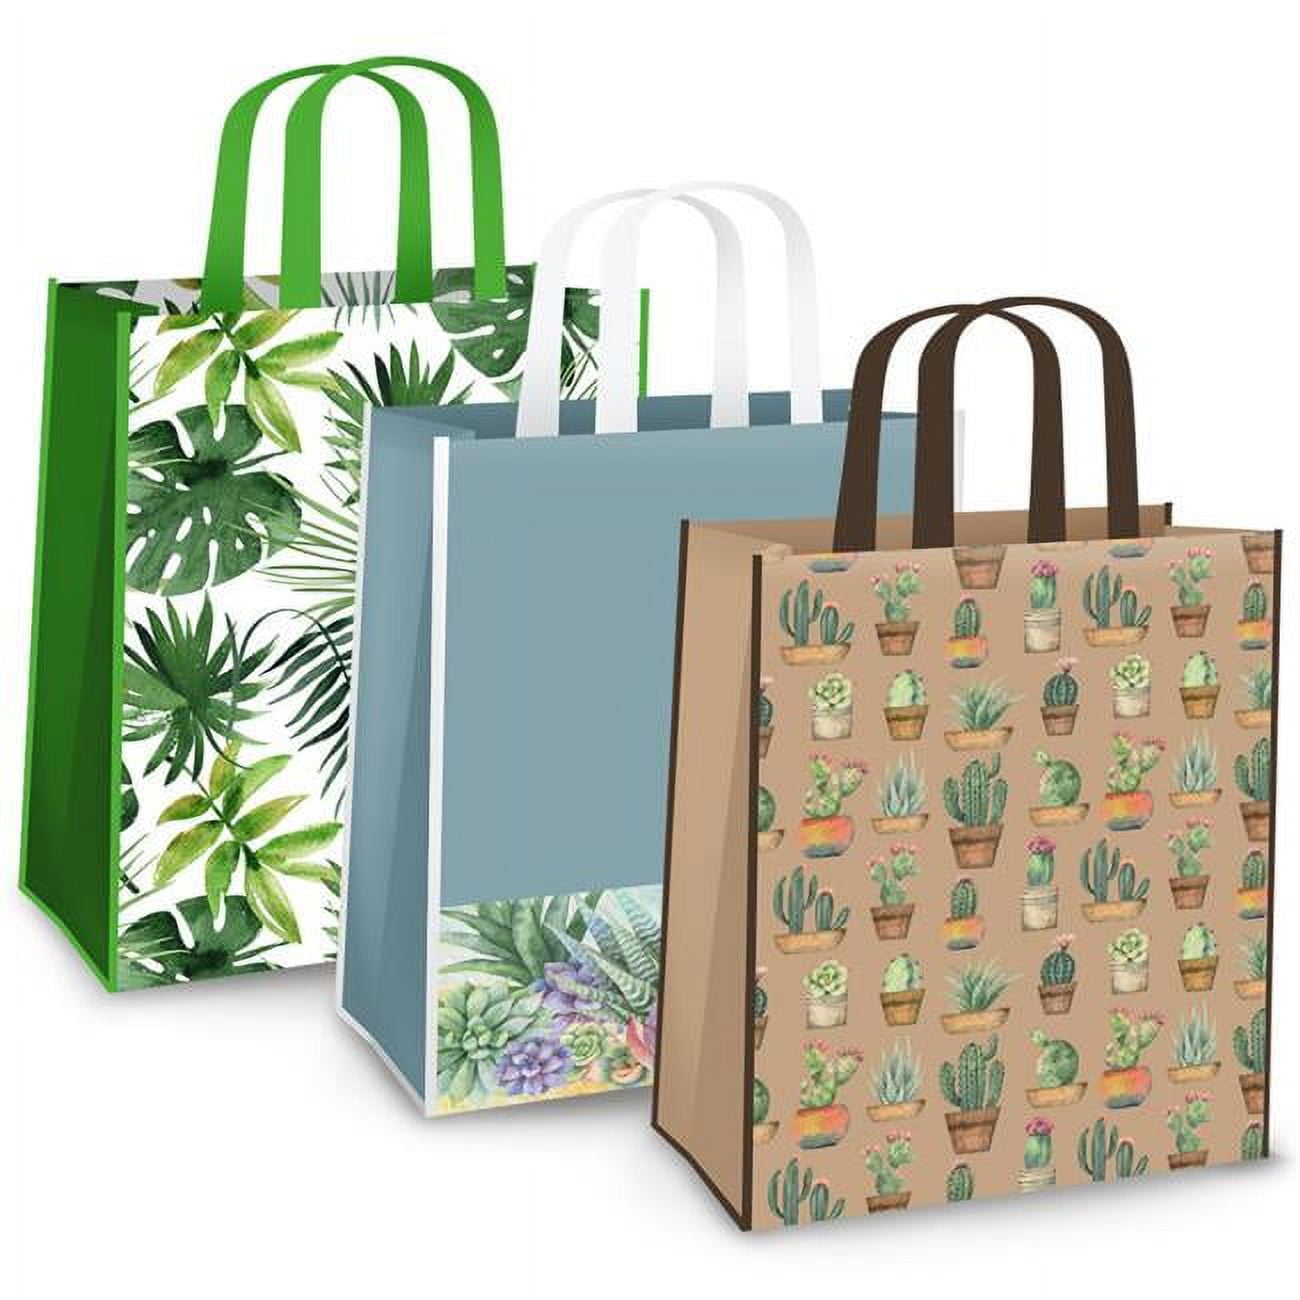 Picture of DDI 2362907 15 x 14 in. Reusable Assortment Bag with Plants Design - Case of 144